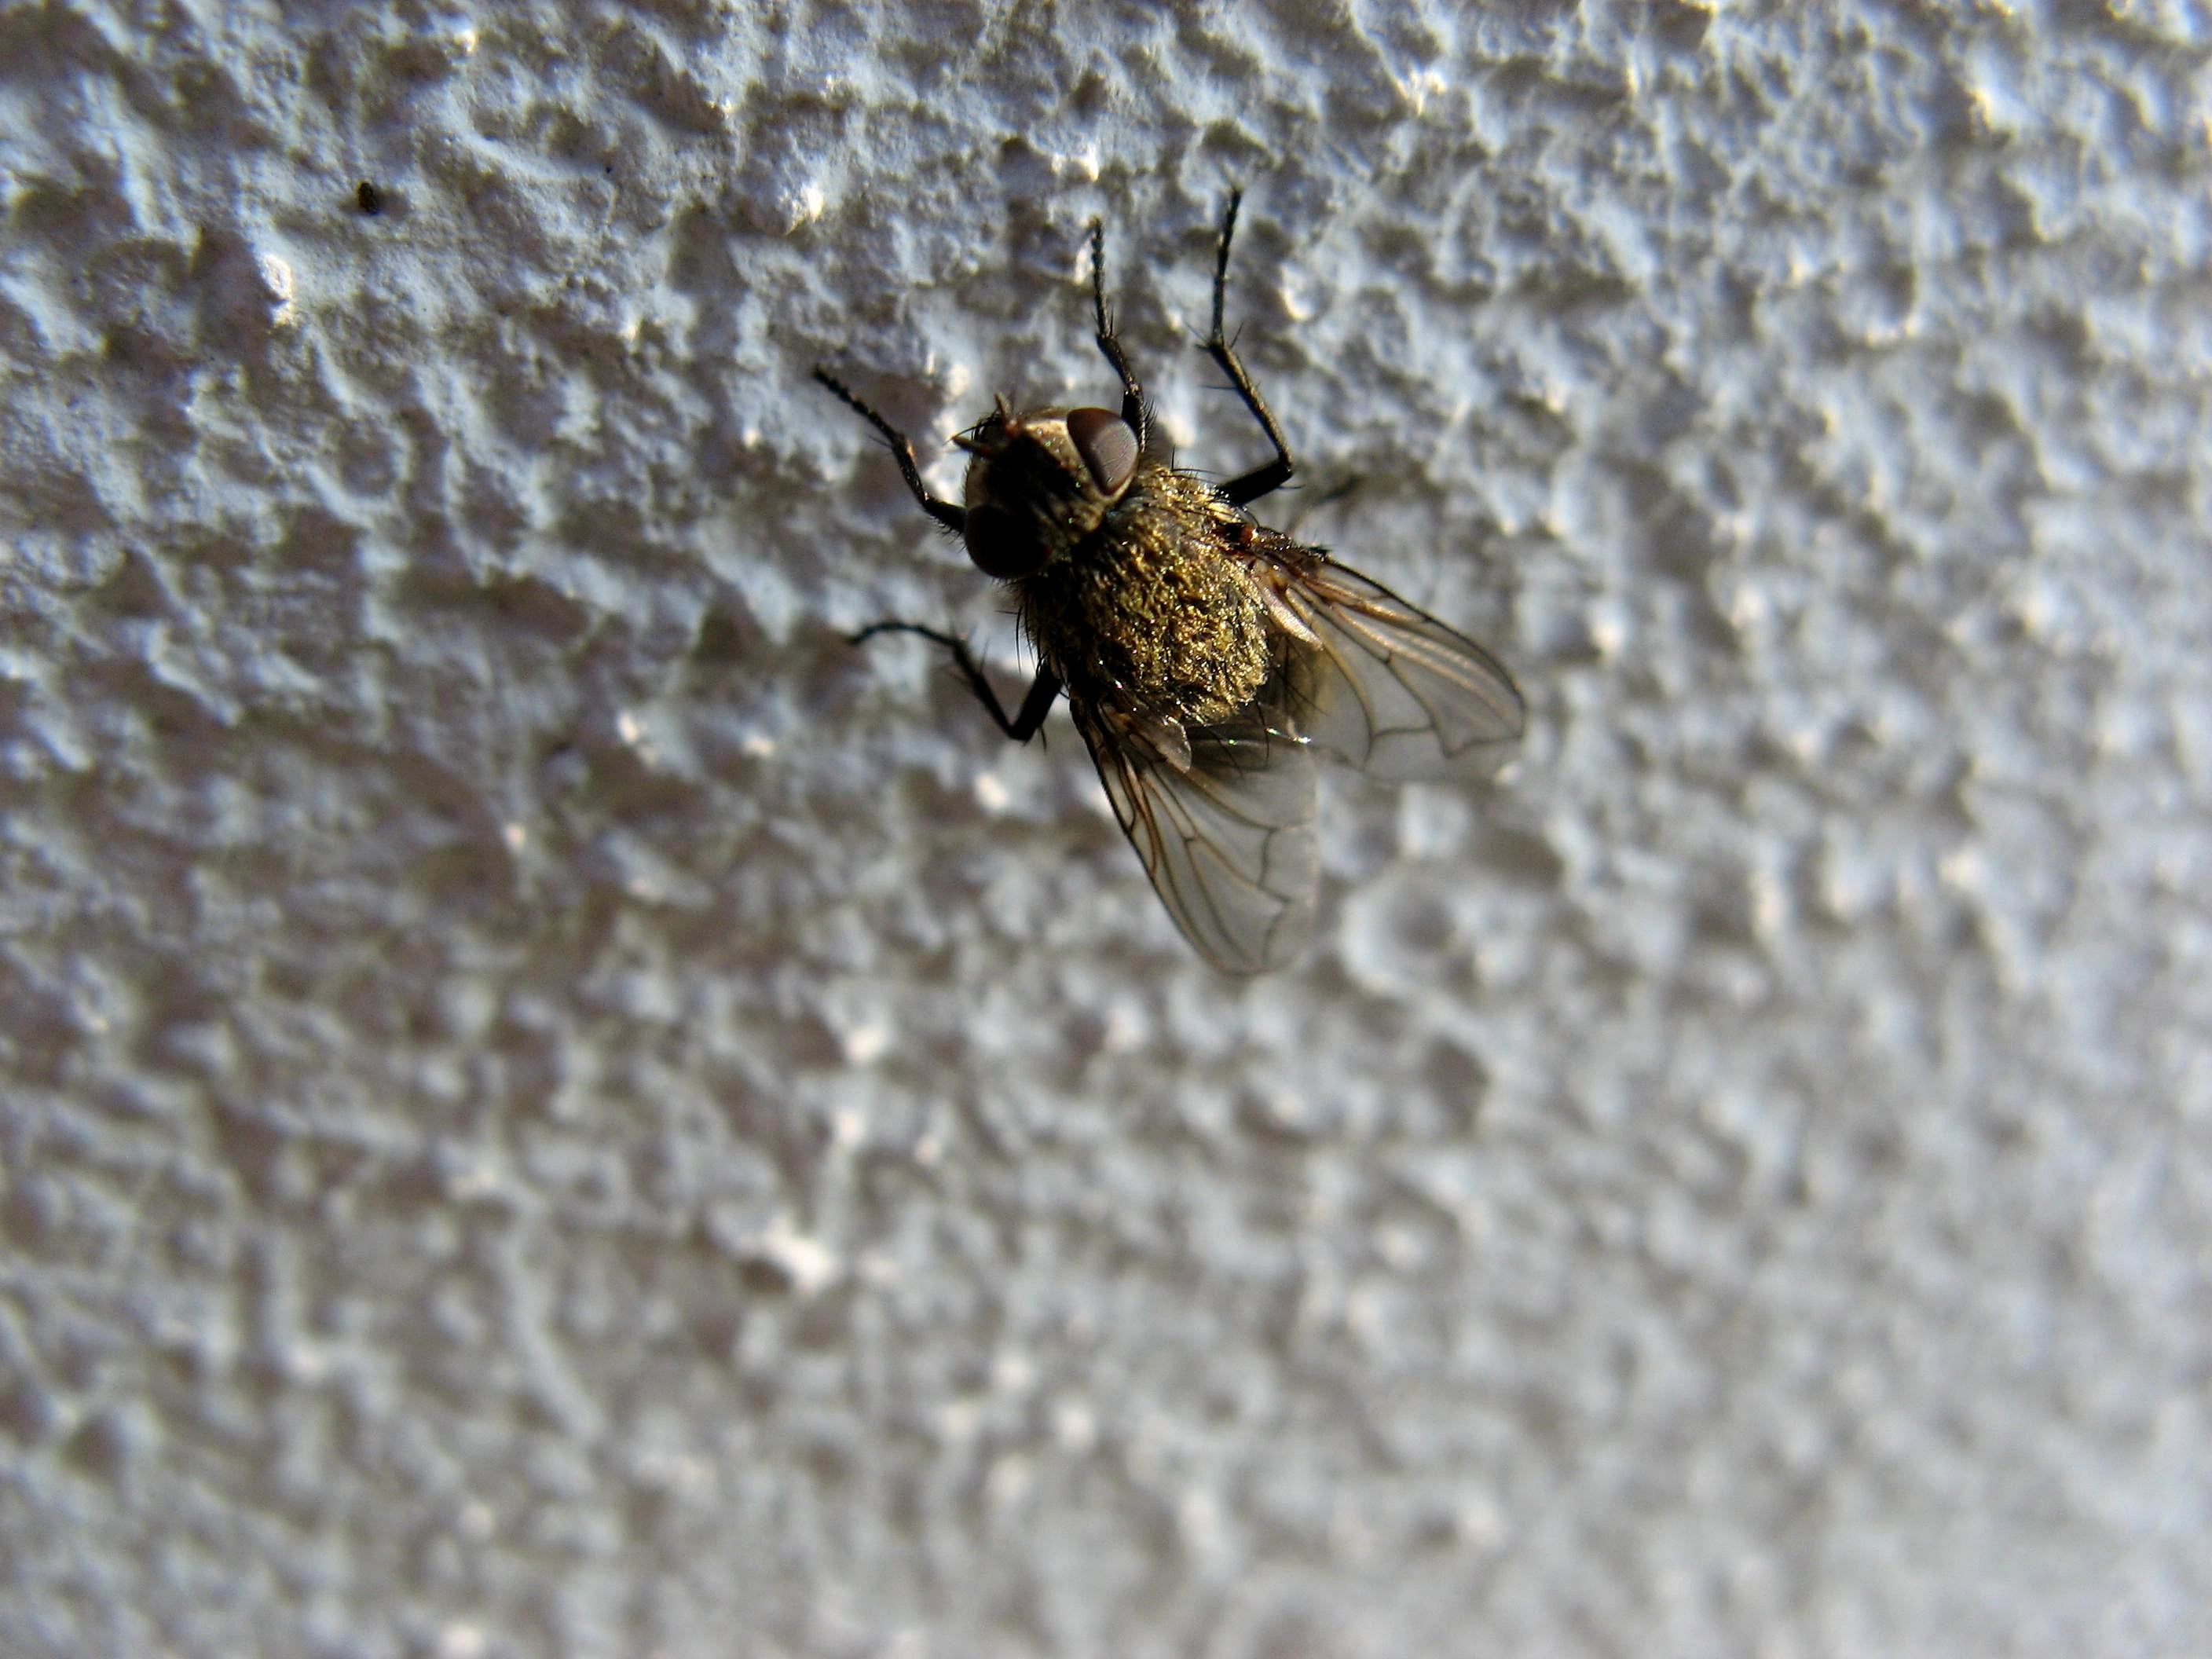 File:Fly on the wall.jpg - Wikimedia Commons